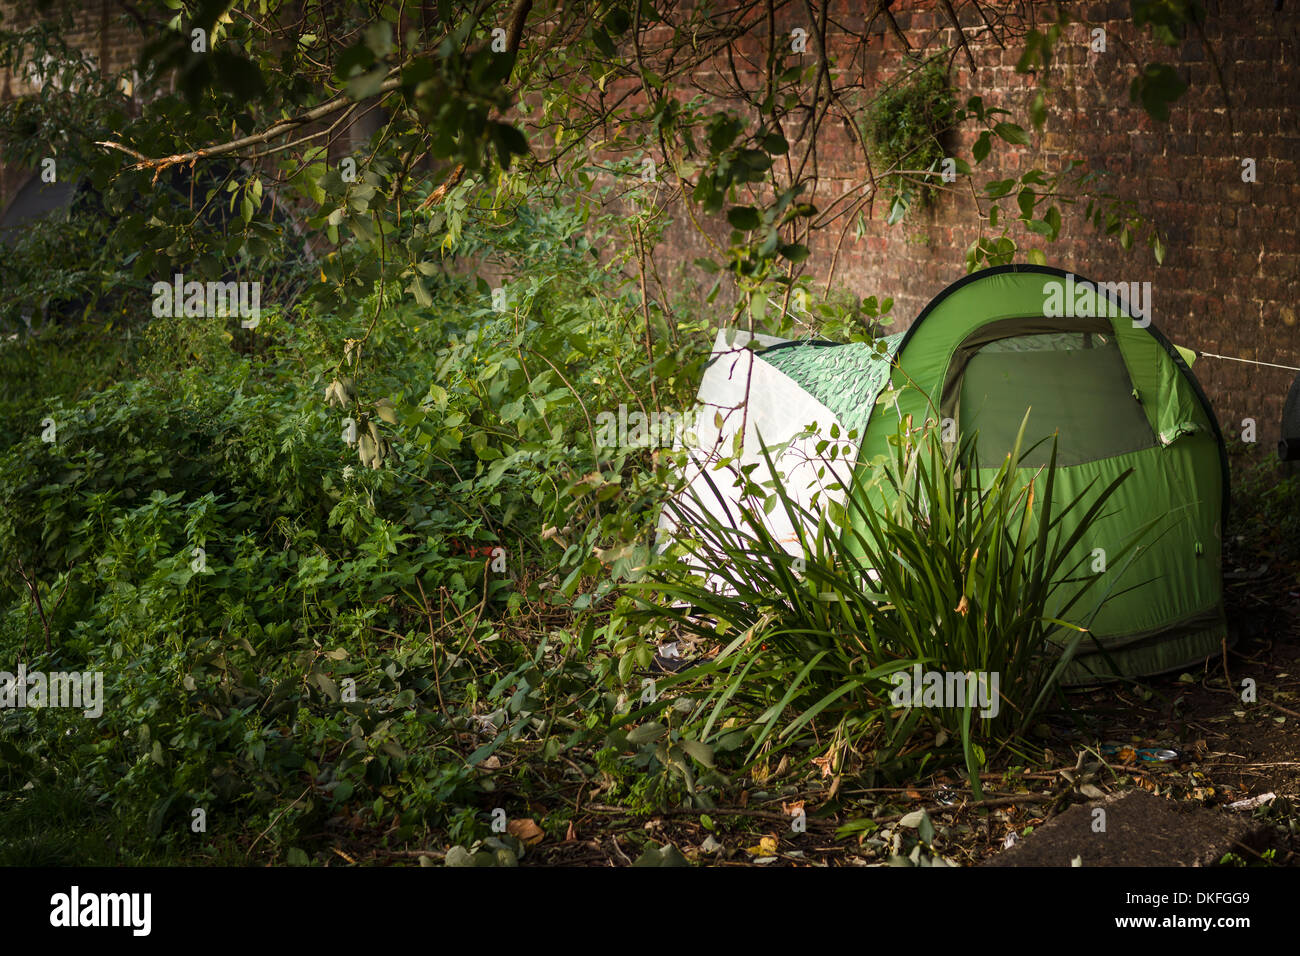 Shelter for a homeless person Stock Photo